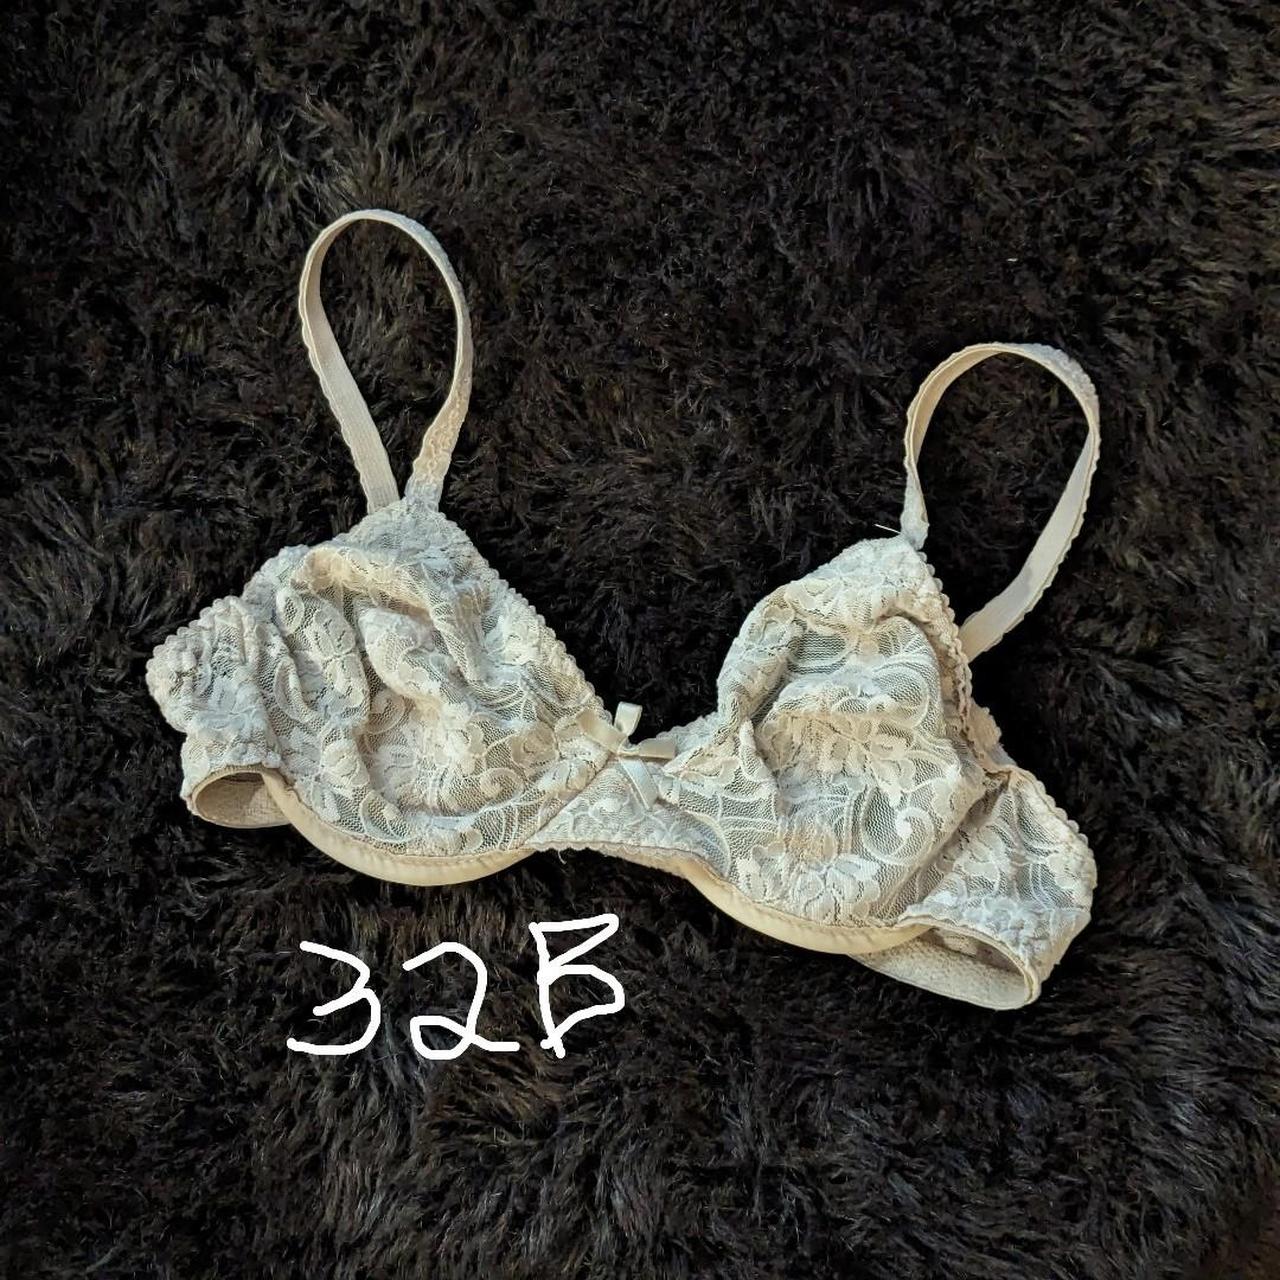 Women's JCPenney Bras, New & Used